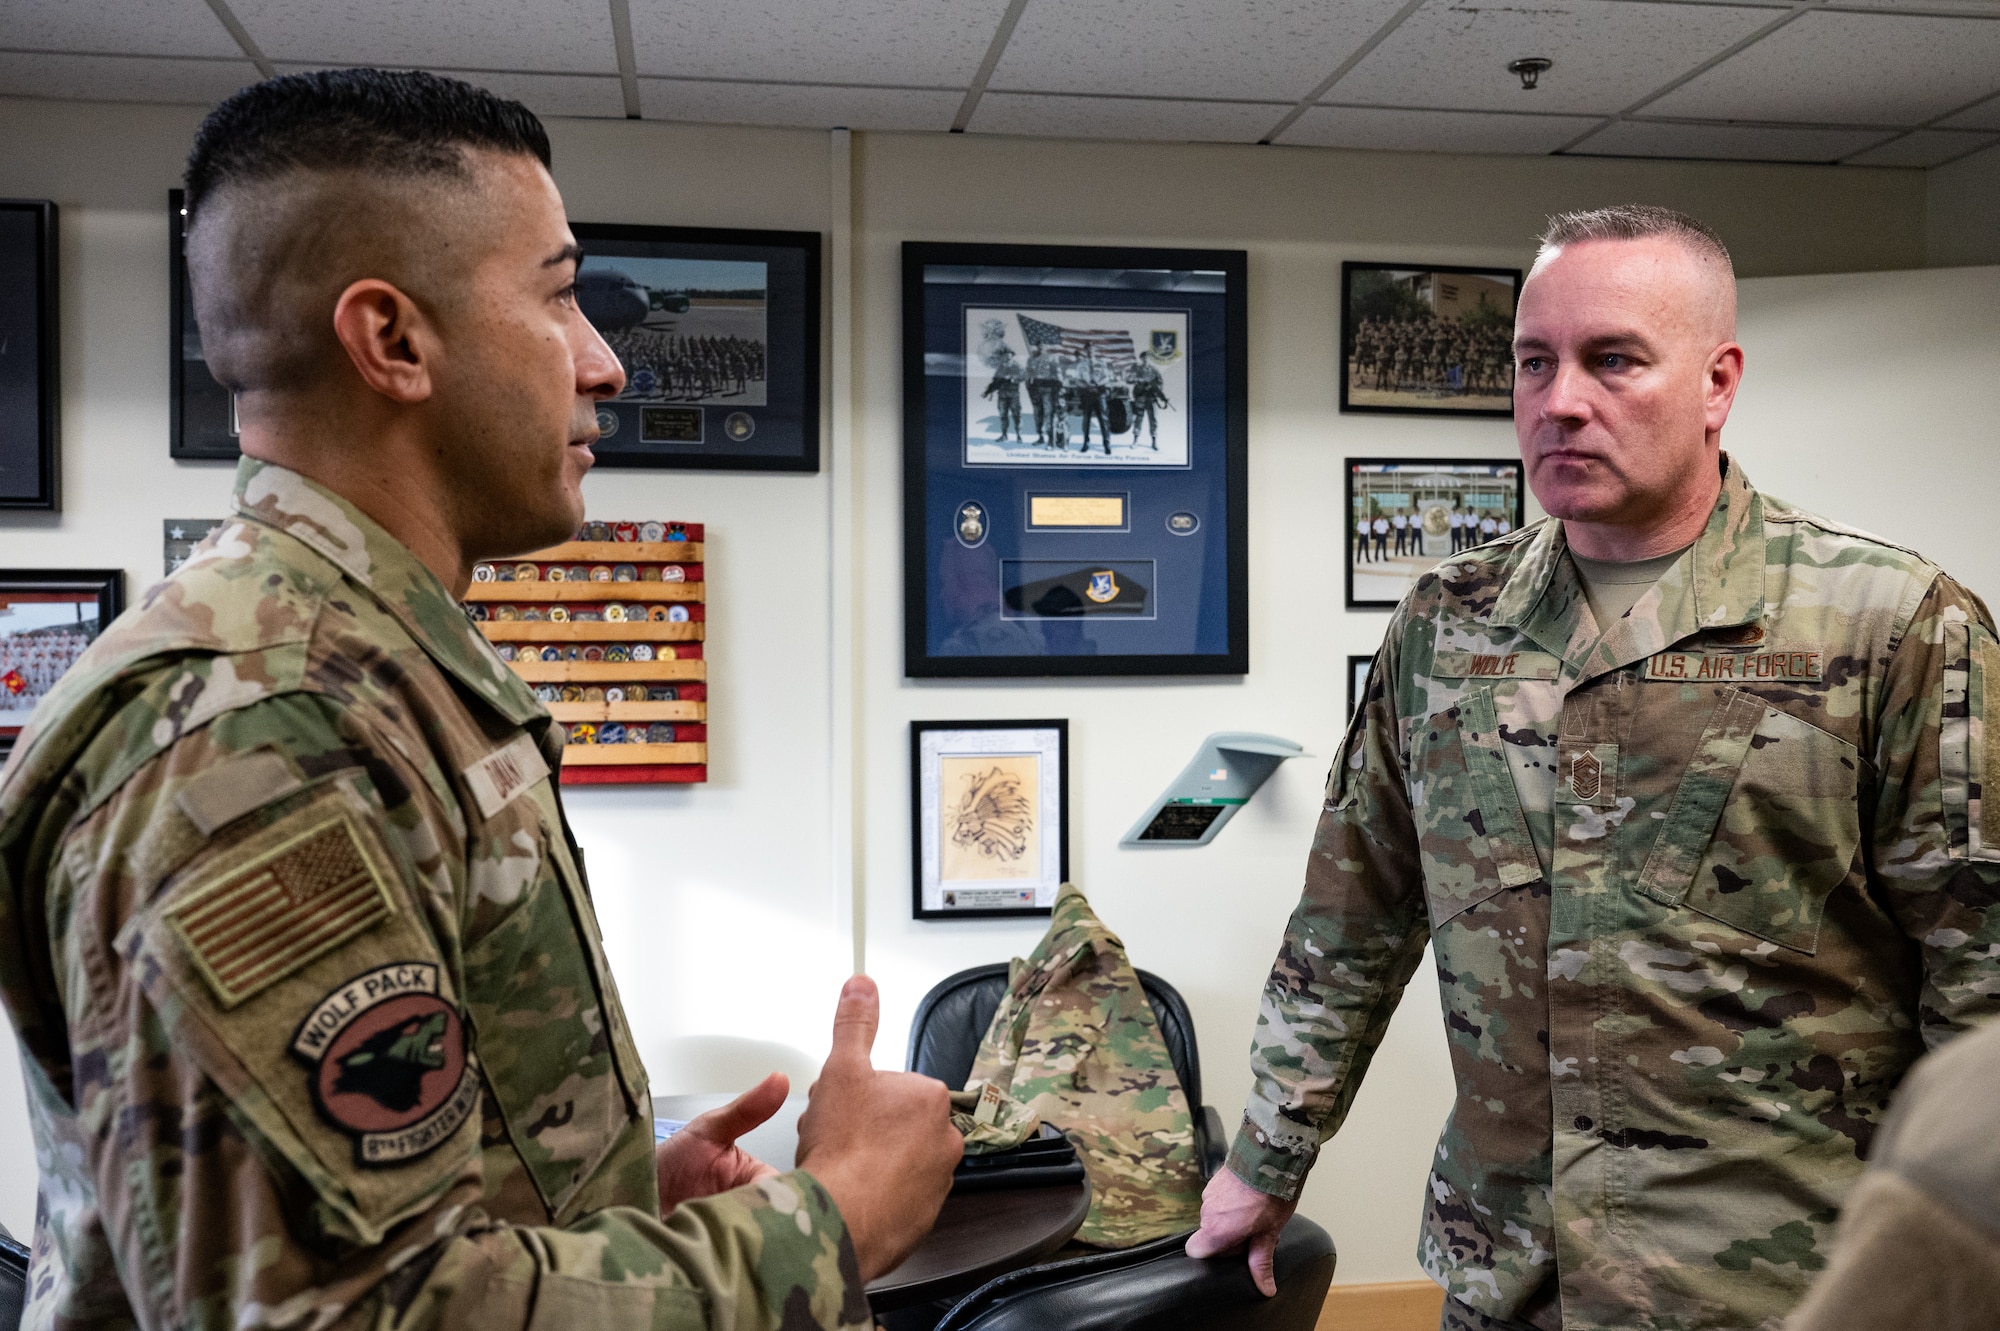 Chief Master Sgt. Carlos Damian (left), 8th Fighter Wing command chief, speaks with Chief Master Sgt. David R. Wolfe, Pacific Air Forces Command chief master sergeant, at Kunsan Air Base, Republic of Korea, Dec. 5, 2022. During his visit with Kunsan’s Wolf Chief, Wolfe spoke about future training and readiness opportunities that would further develop the installation’s combat-ready Airmen who are the foundation of Pacific stability and security. (U.S. Air Force photo by Staff Sgt. Sadie Colbert)